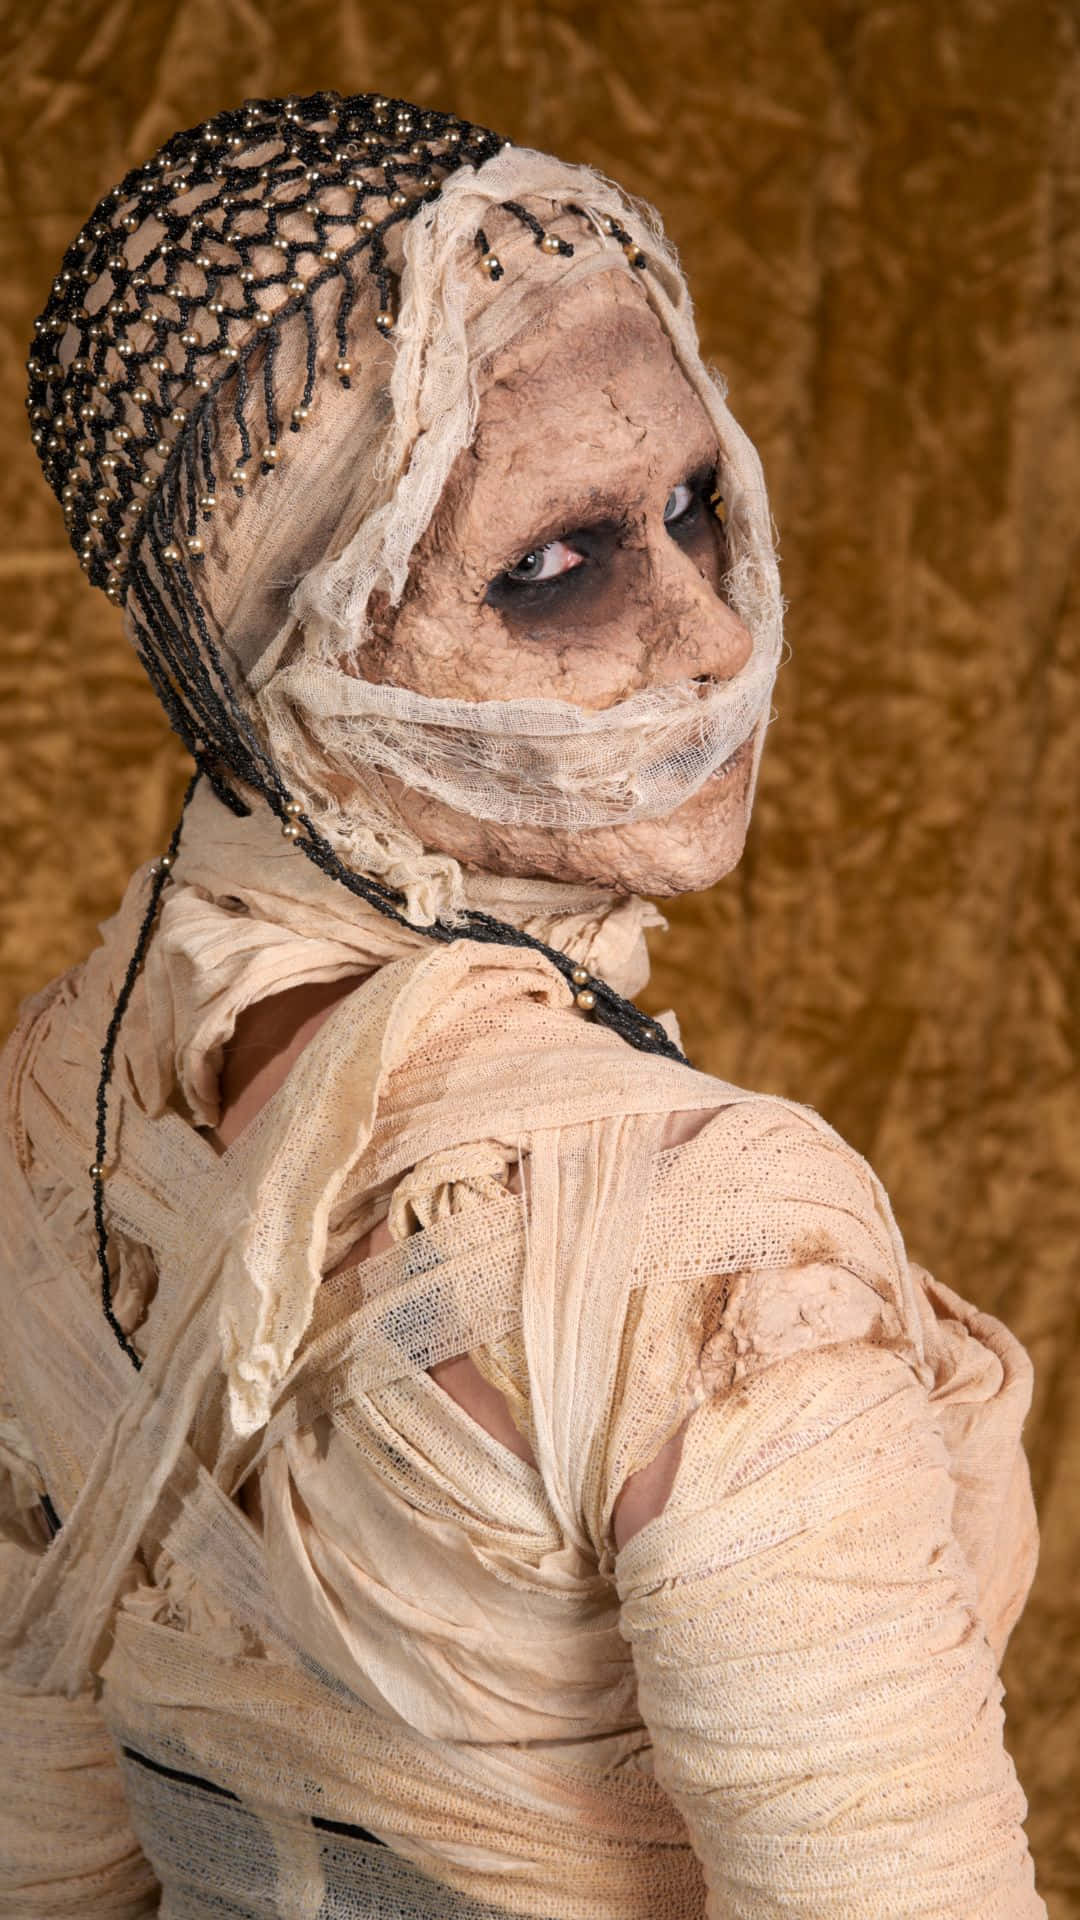 Make your Halloween even spookier by wearing one of these realistic mummy costumes Wallpaper